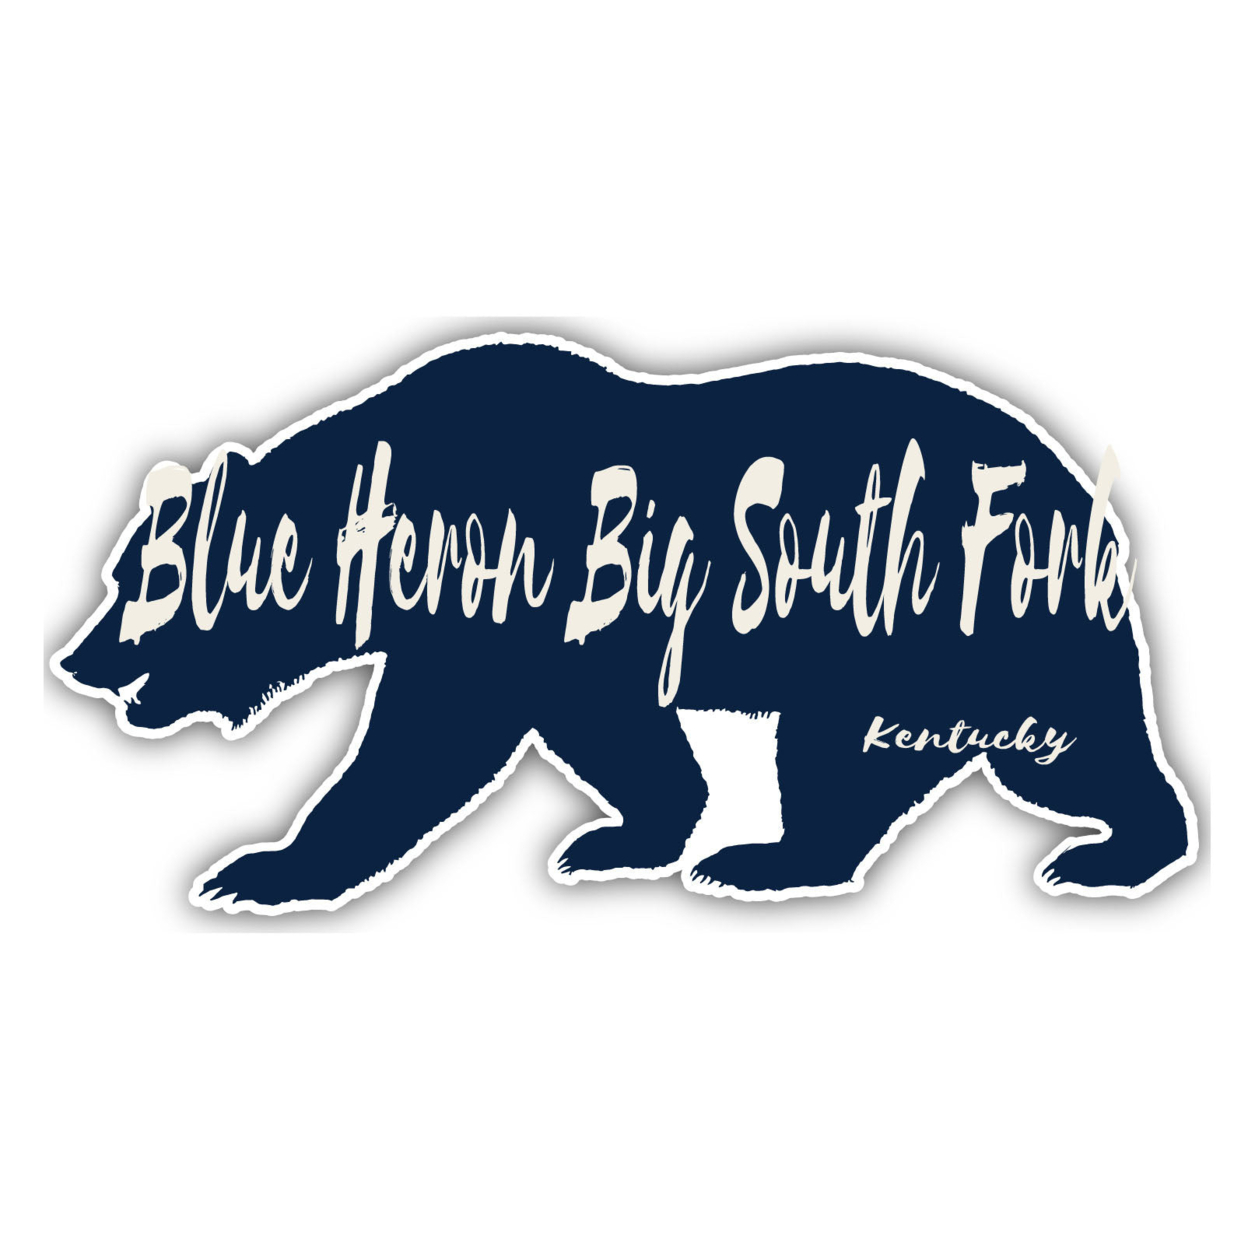 Blue Heron Big South Fork Kentucky Souvenir Decorative Stickers (Choose Theme And Size) - 4-Pack, 8-Inch, Bear